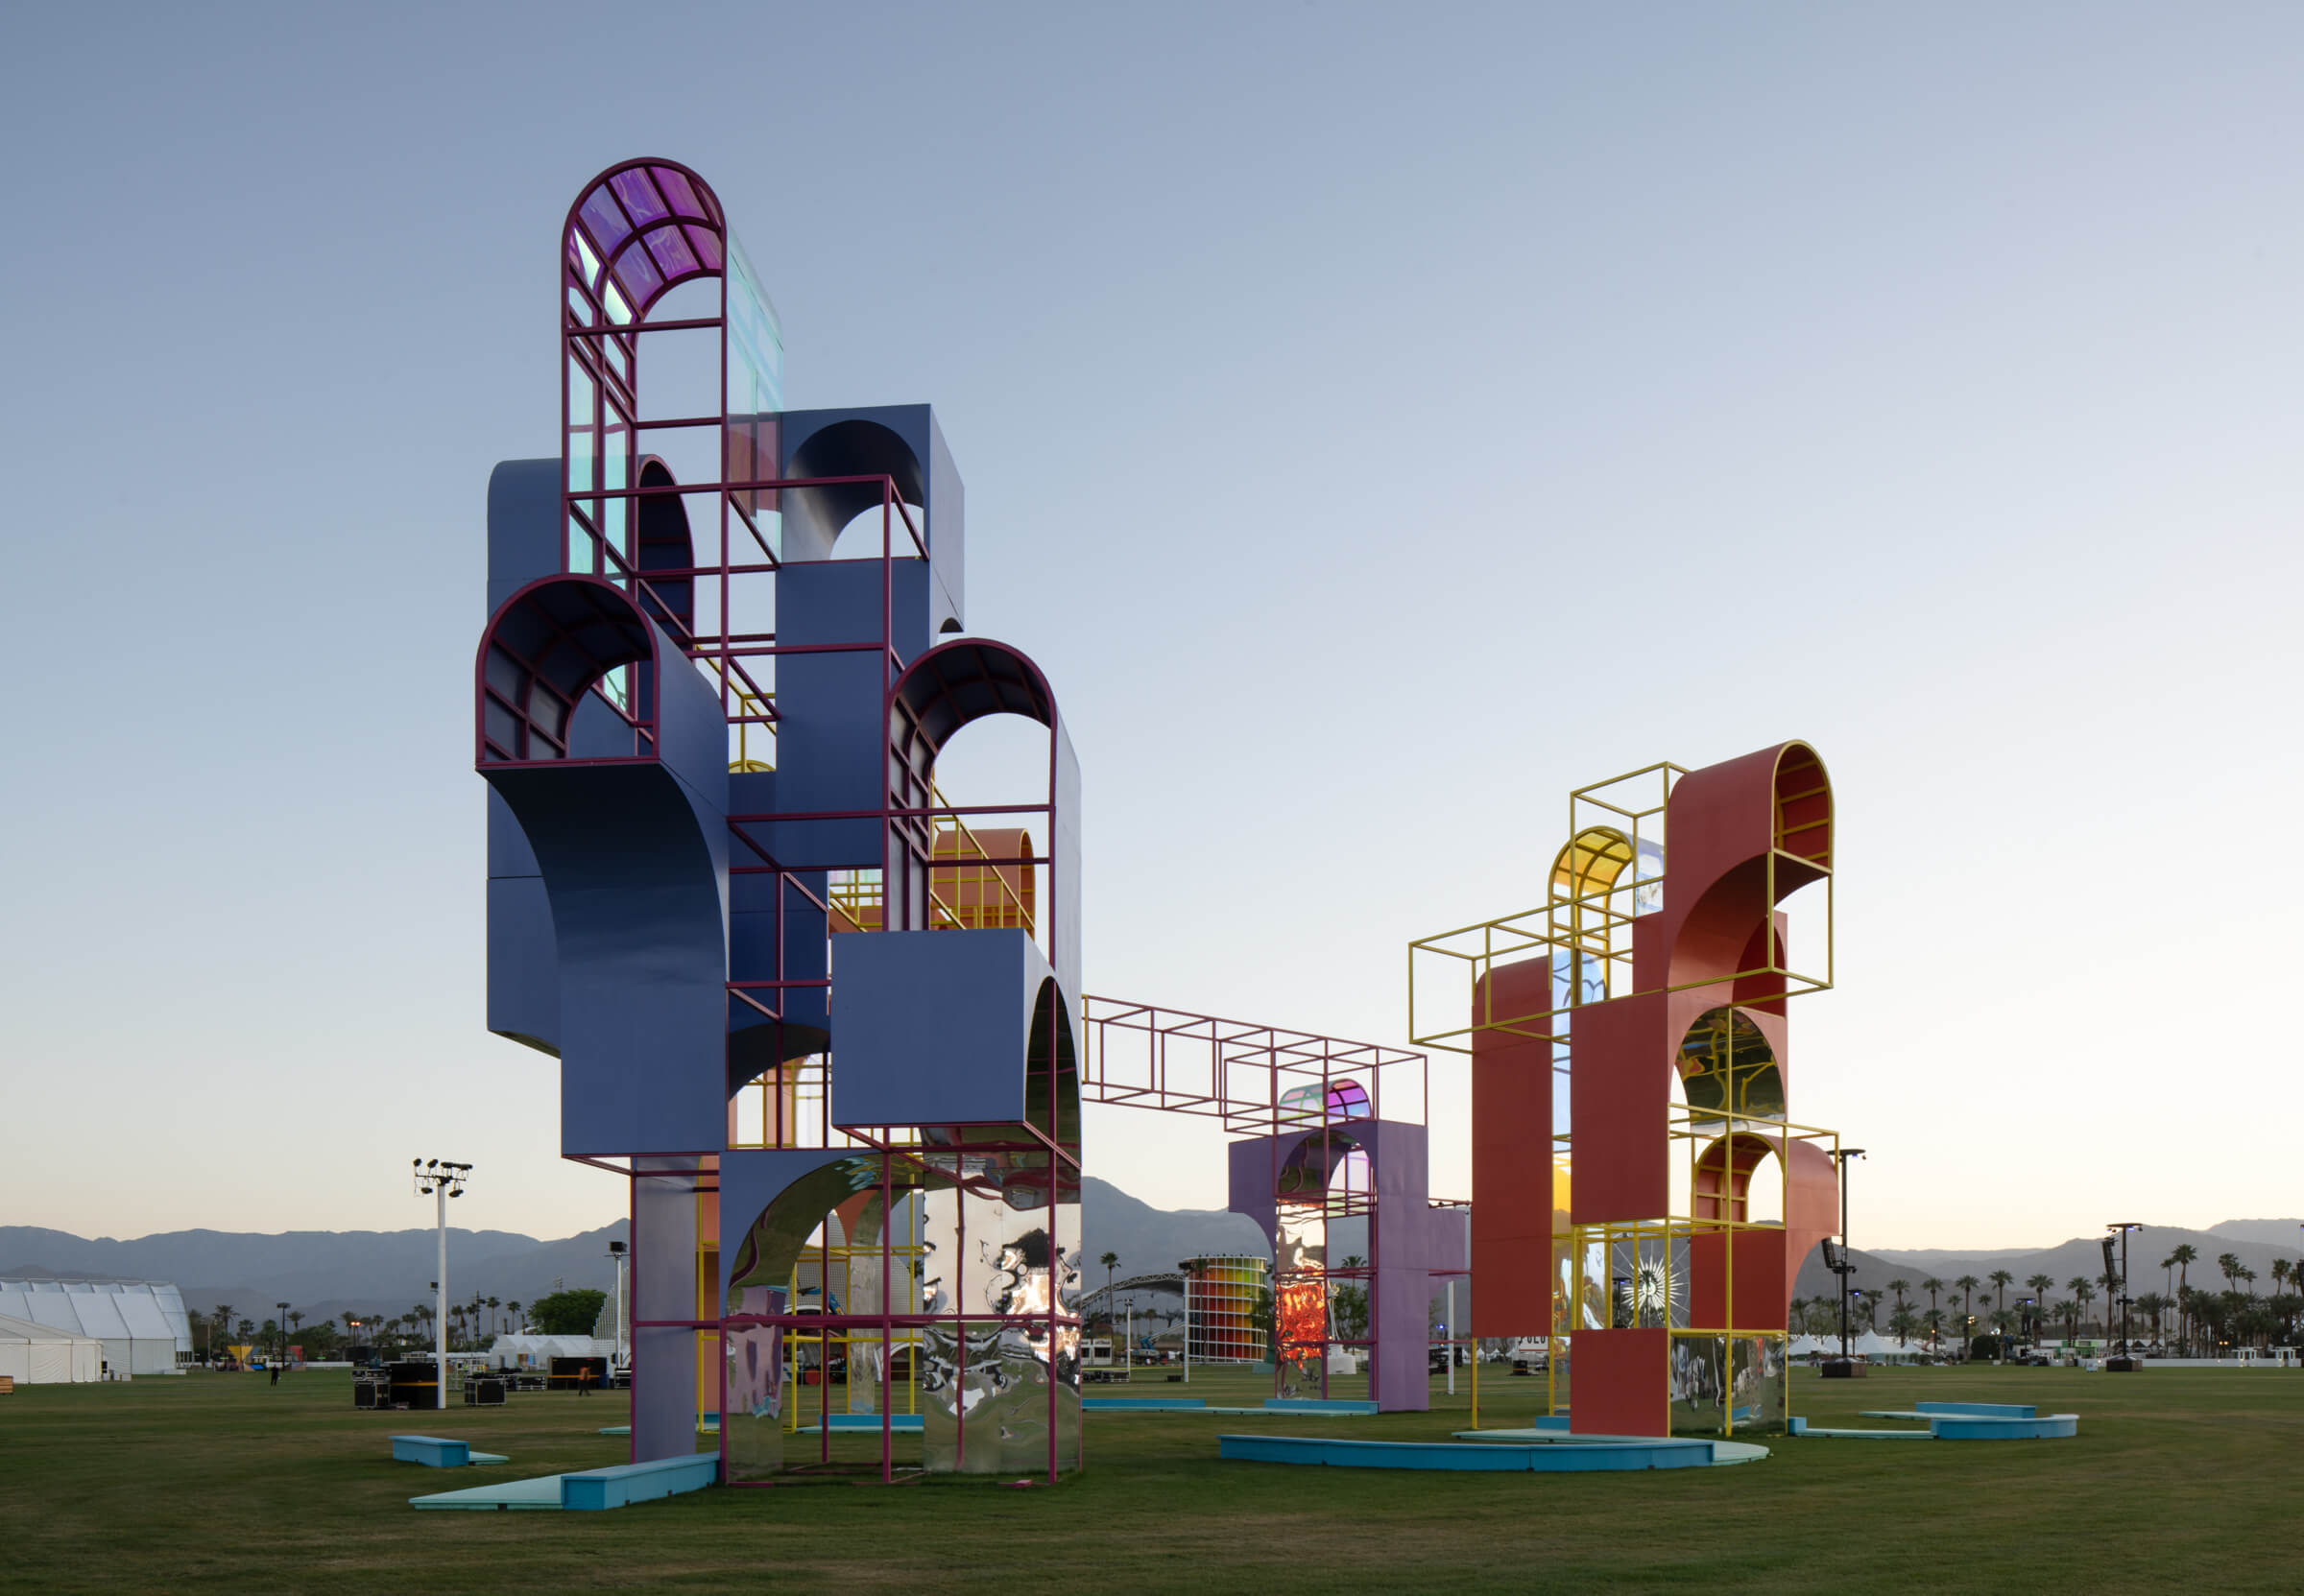 Six artists and designers debut monumental installations at Coachella